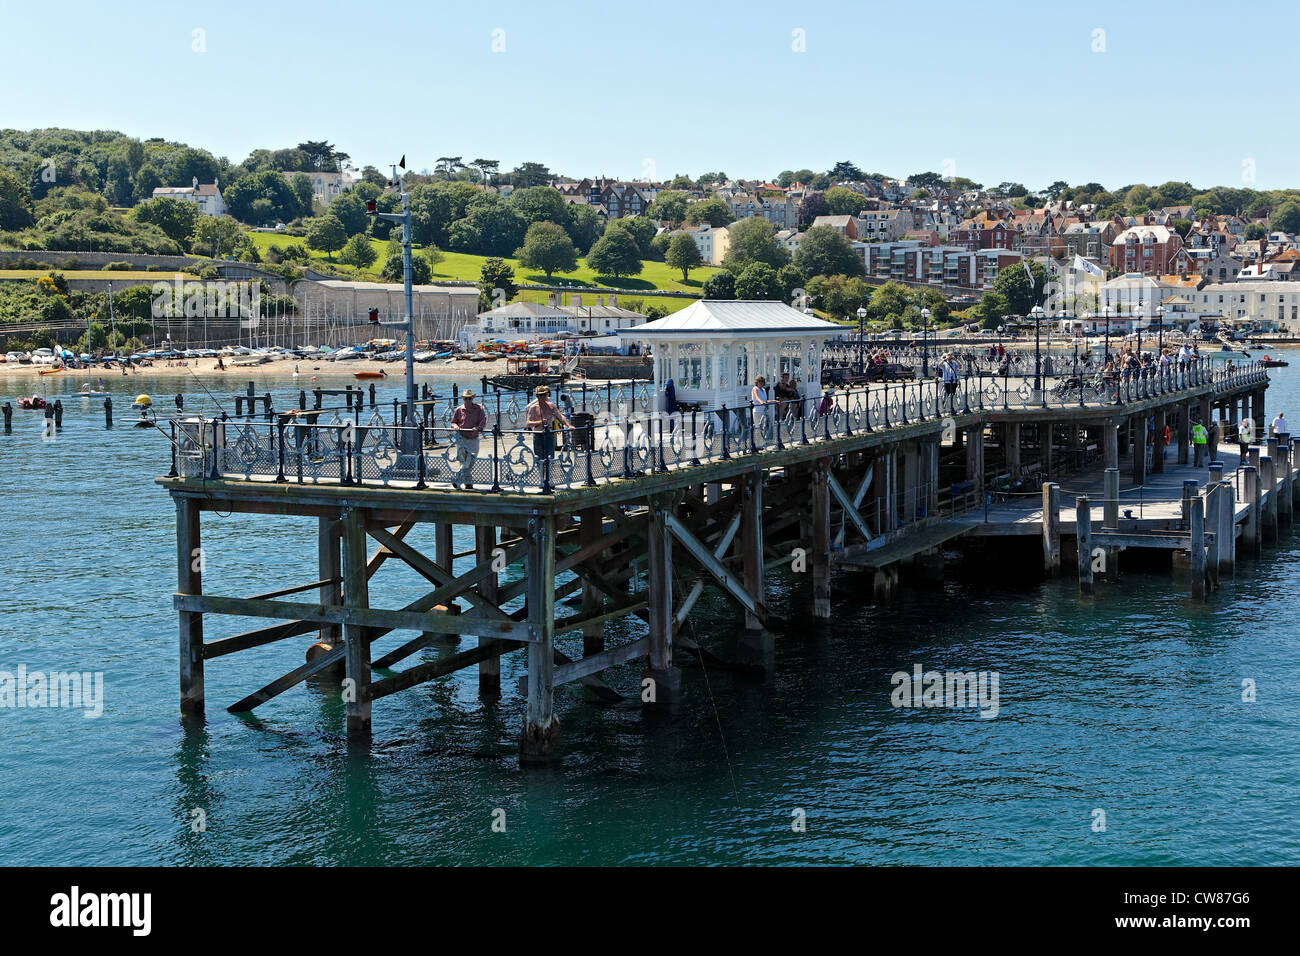 Swanage Pier, Swanage, Purbeck, Dorset . Stock Photo